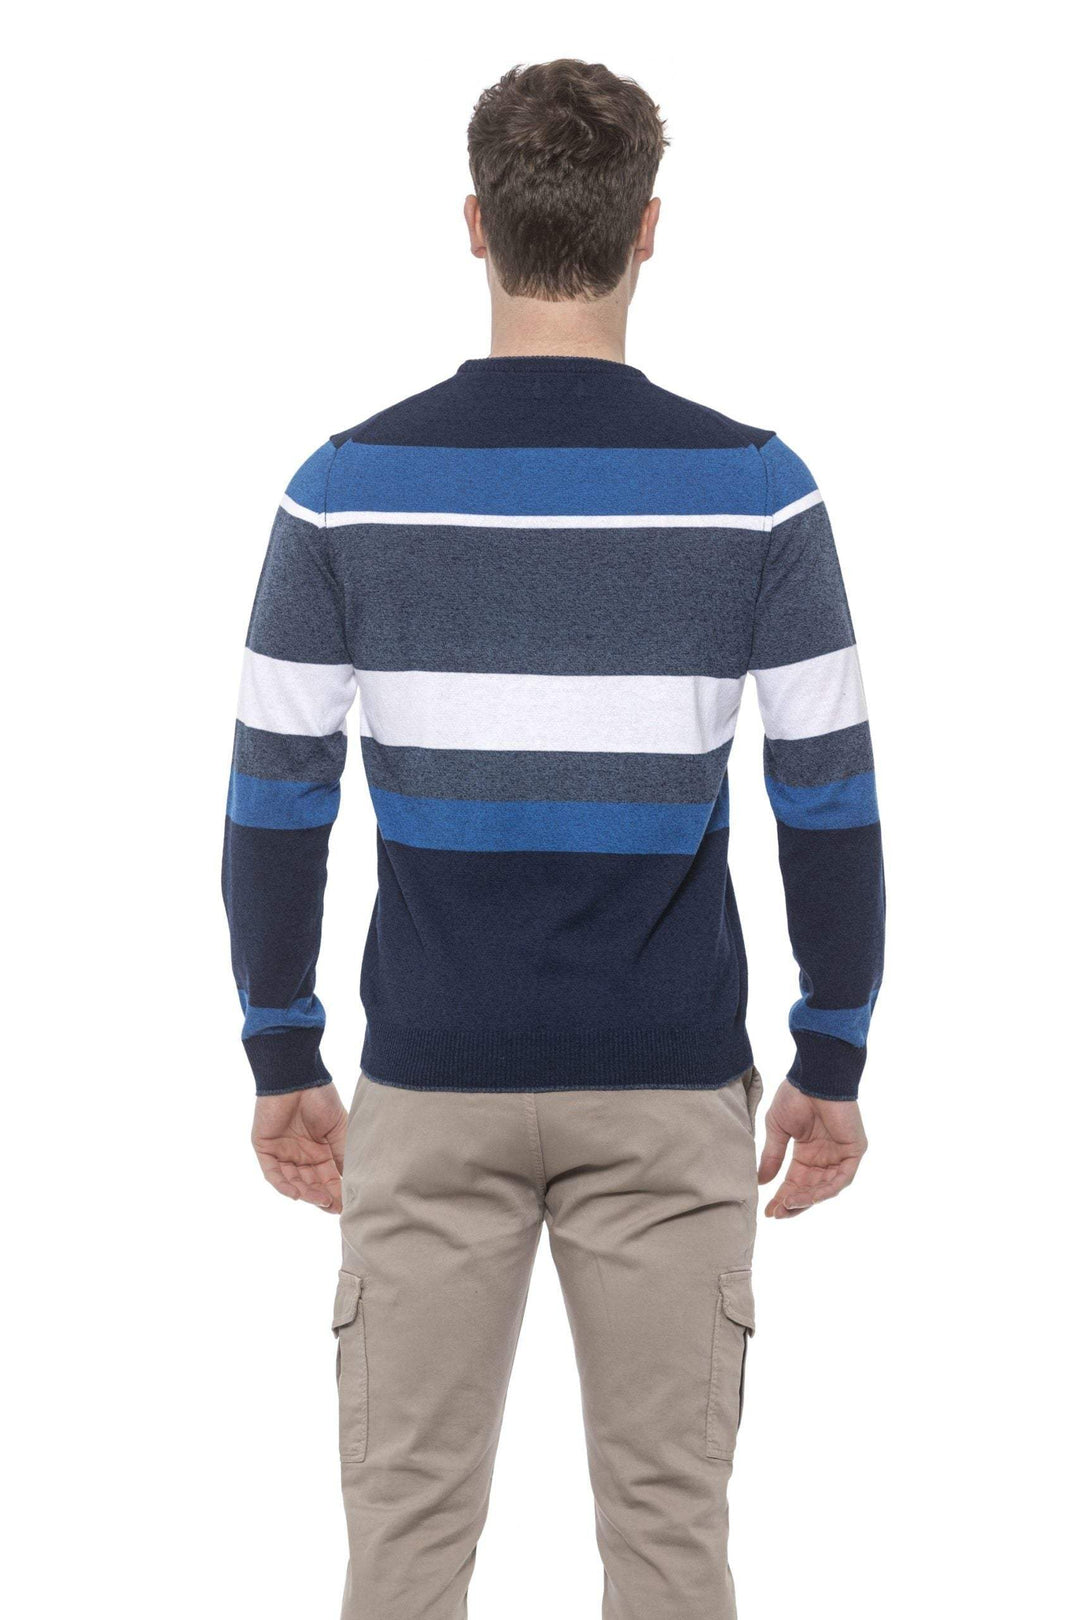 Conte of Florence crew neck  solid color  Sweater #men, Blue, Conte of Florence, feed-agegroup-adult, feed-color-Blue, feed-gender-male, L, M, S, Sweaters - Men - Clothing, XL at SEYMAYKA